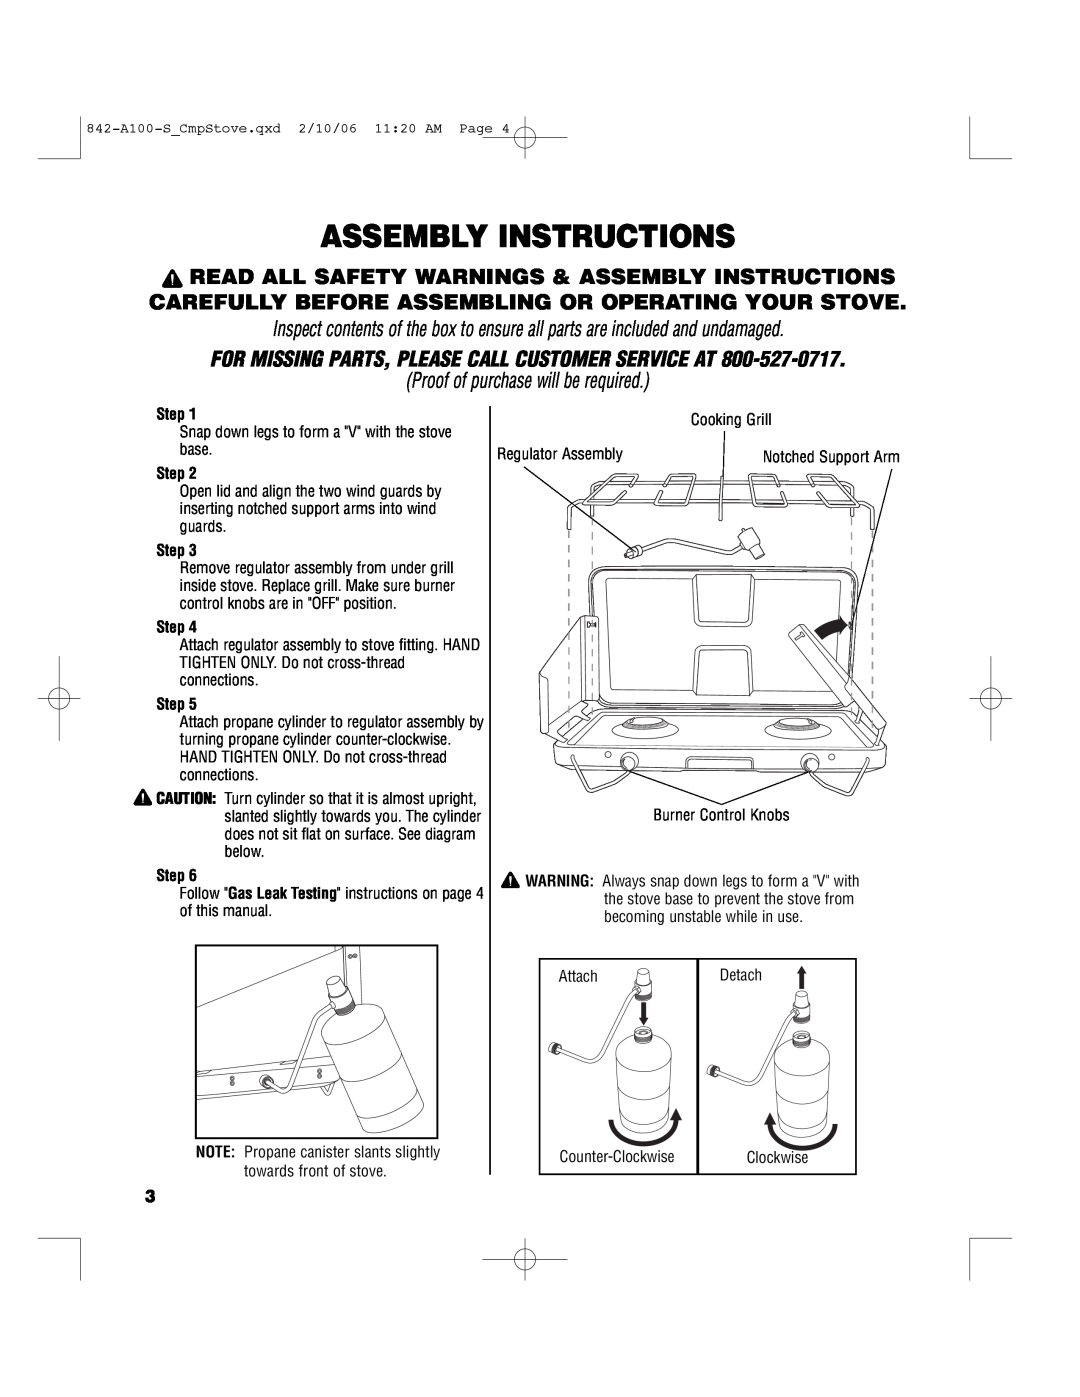 Brinkmann 842-A100-S owner manual Assembly Instructions, For Missing Parts, Please Call Customer Service At, Step 